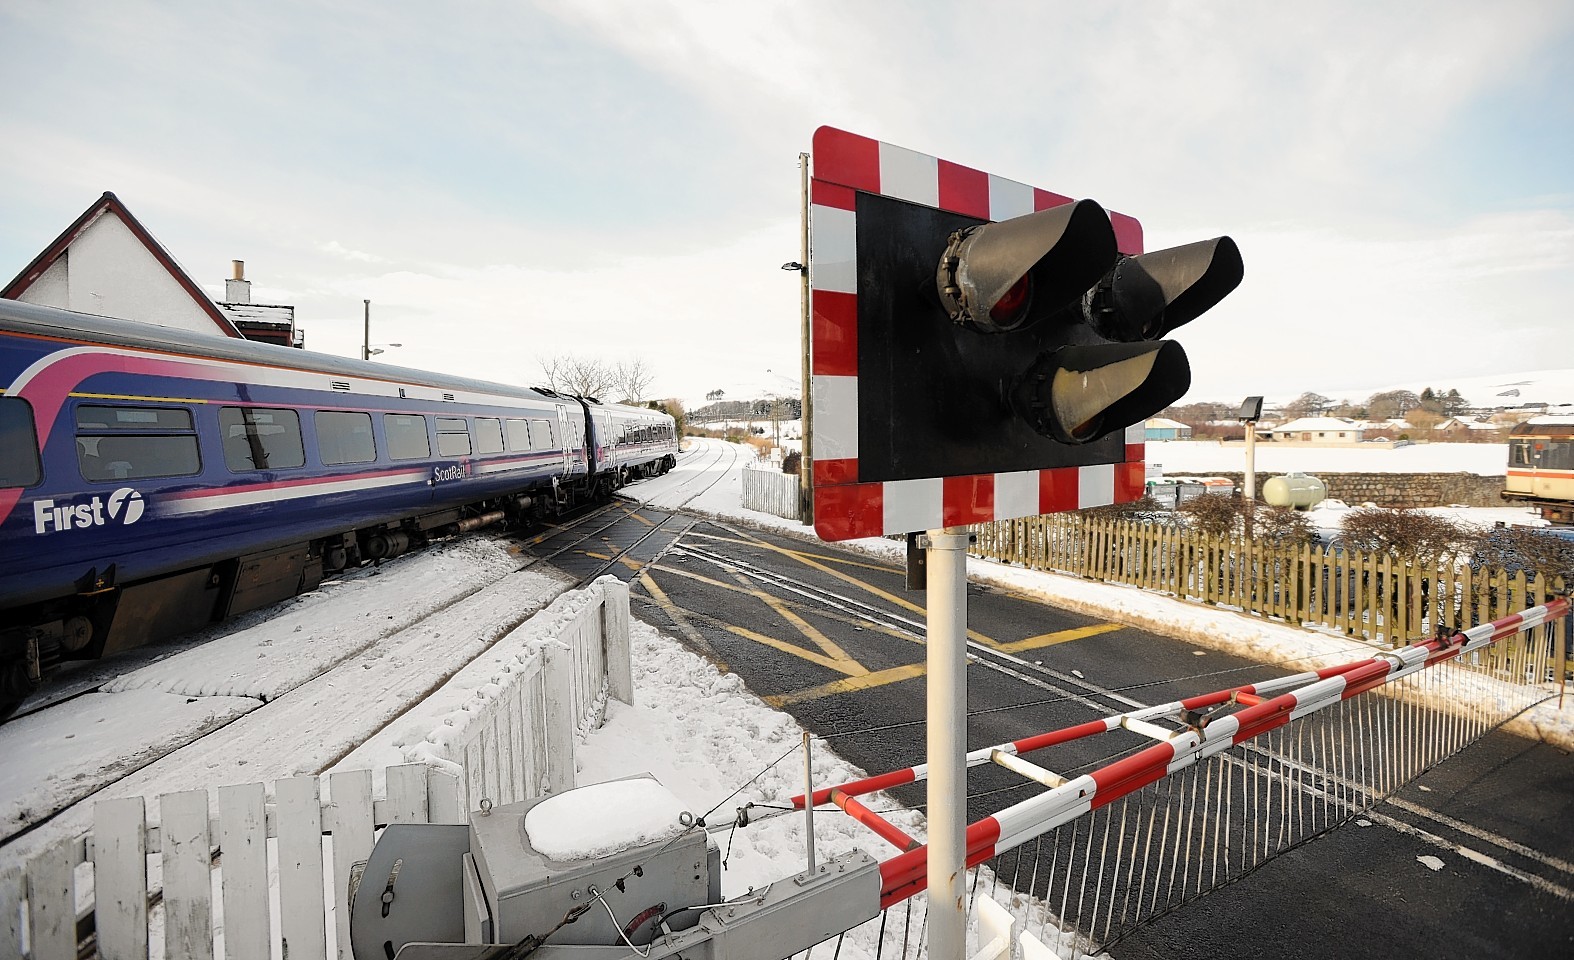 Insch Level Crossing has been closed. Picture shows the level crossing with a train passing through.